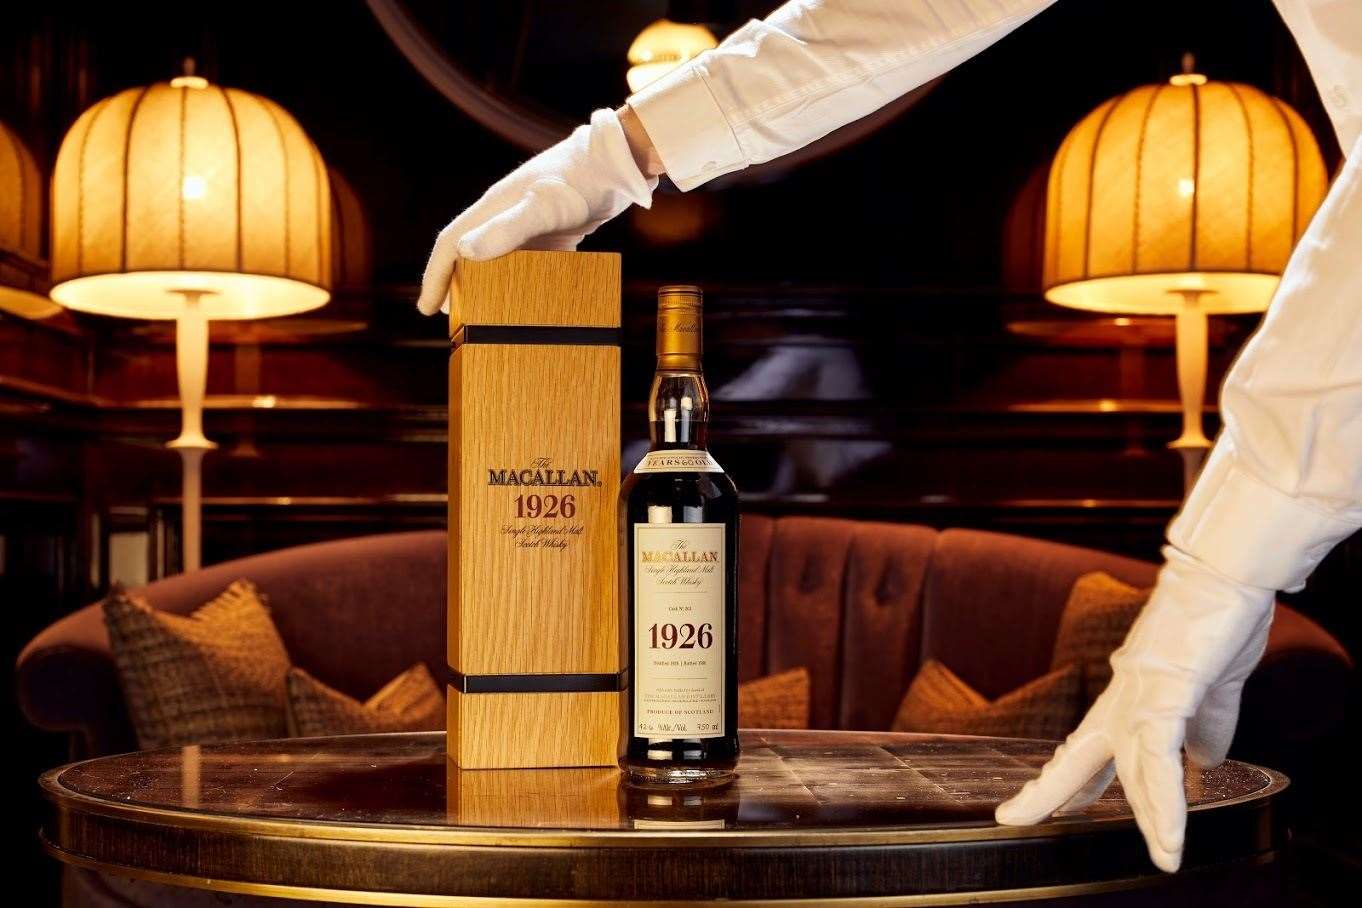 The Macallan 1926 Fine and Rare 60 Year Old, estimated to fetch more than £1 million at auction.